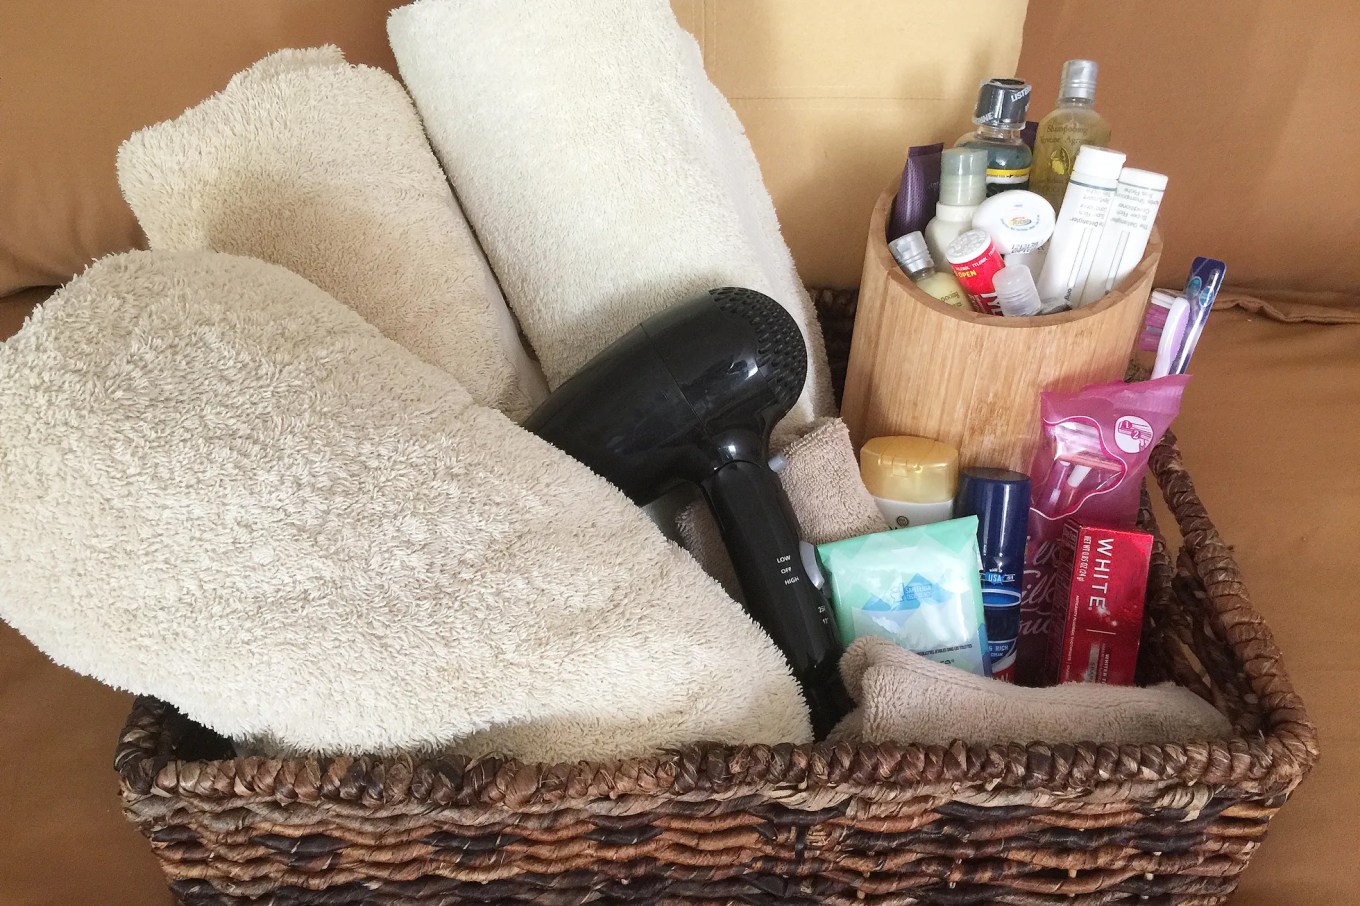 A basket filled with white towels and mini toiletries